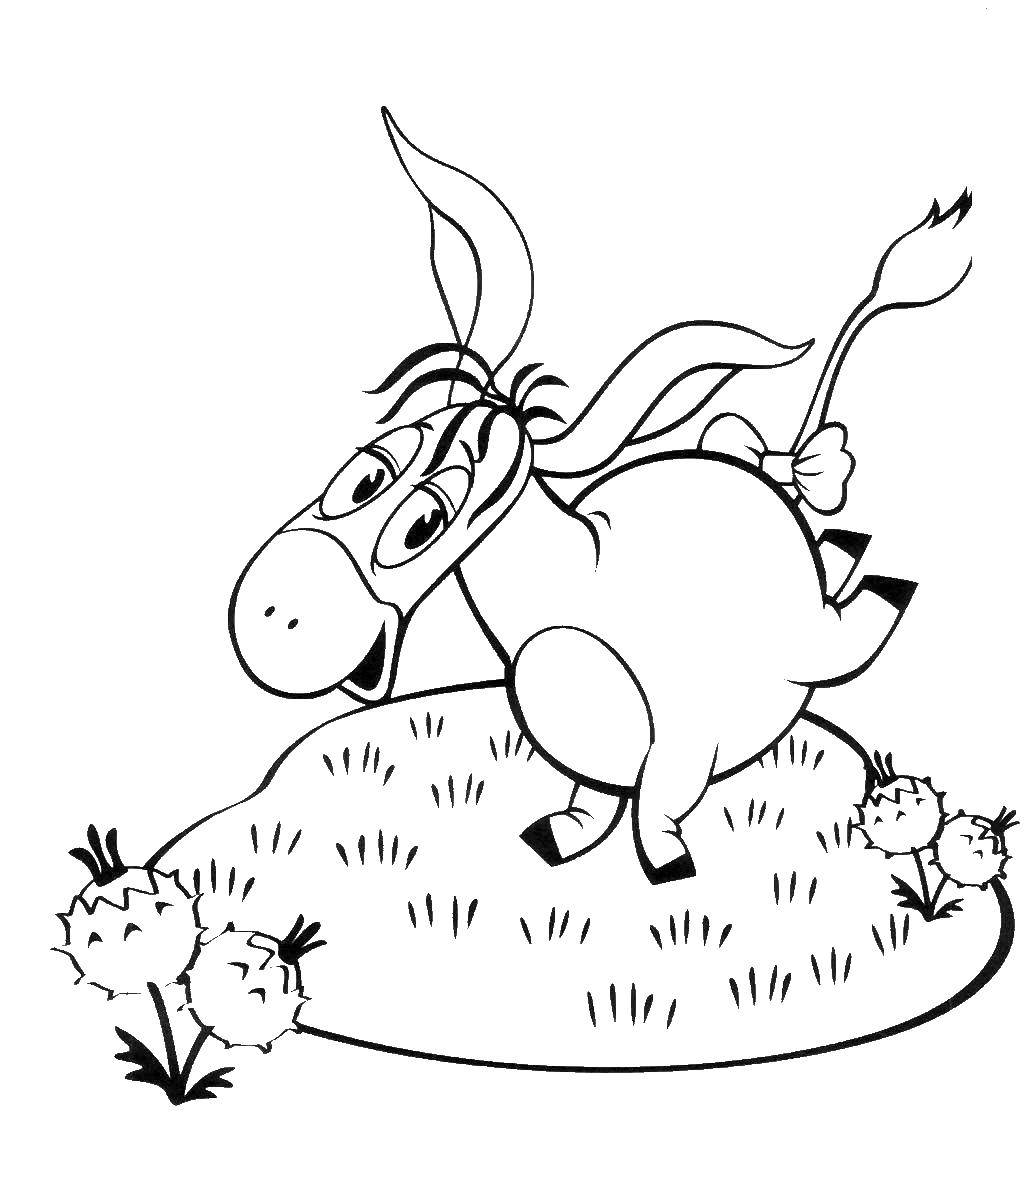 Coloring Eeyore. Category Soviet coloring. Tags:  Donkey.